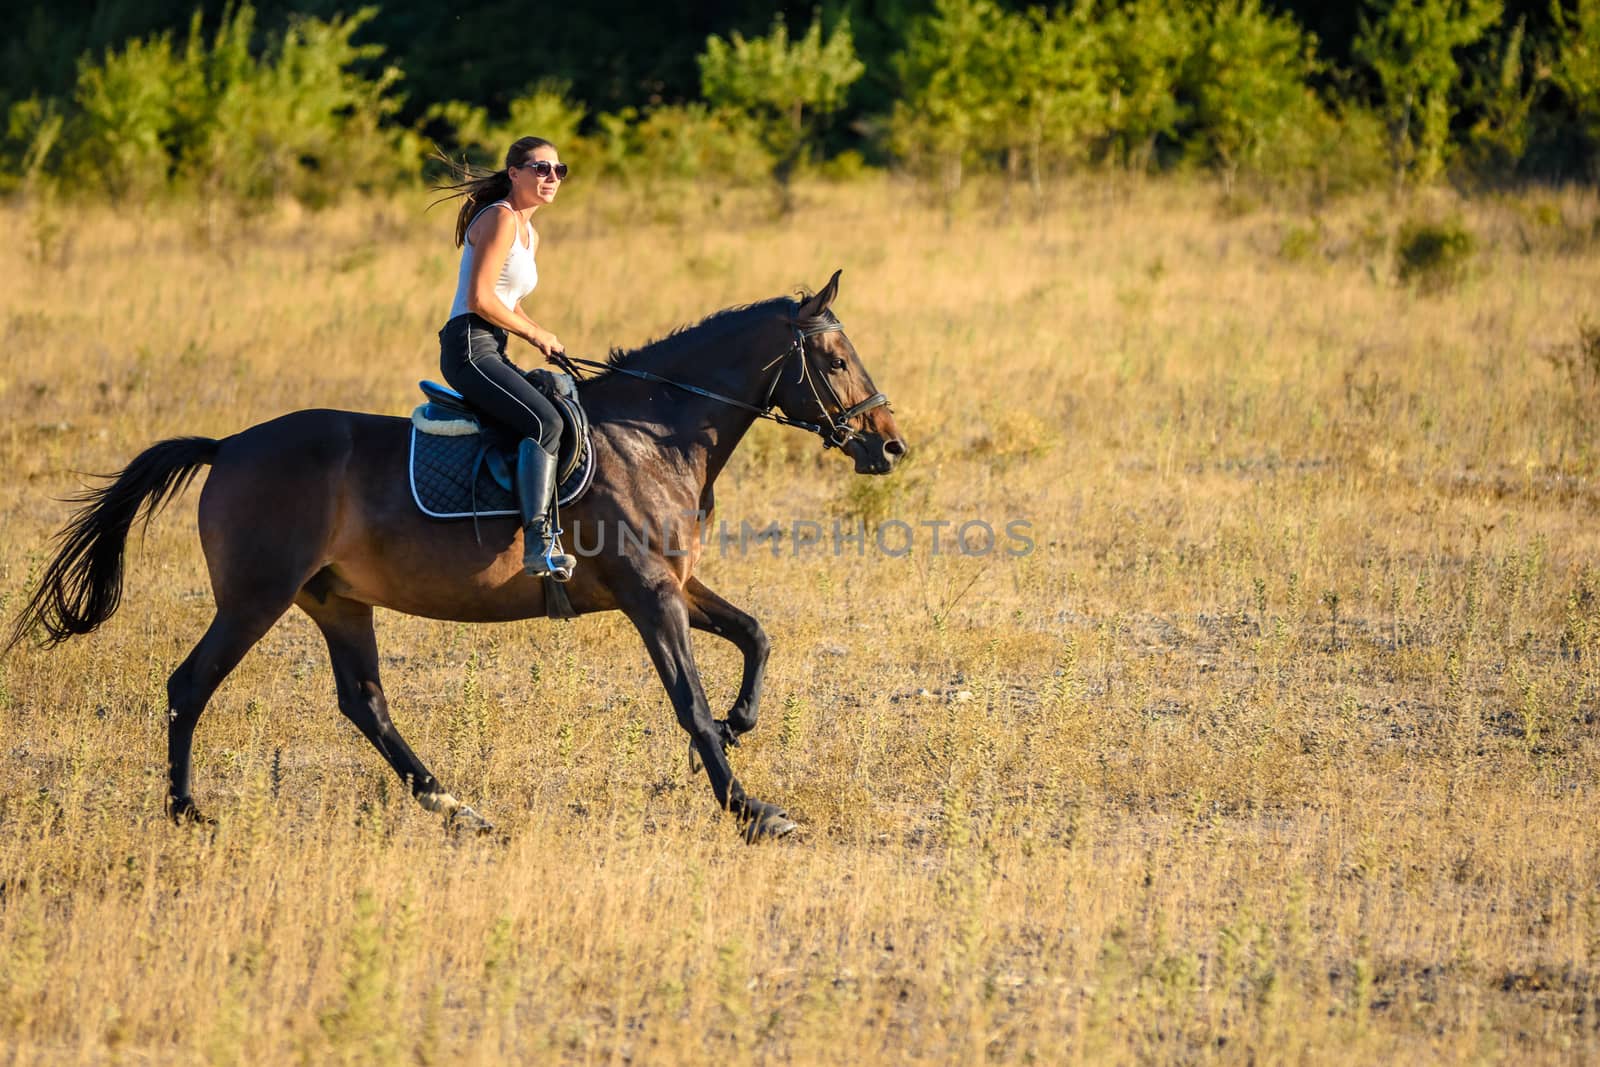 Girl rides a horse across the field on a sunny day